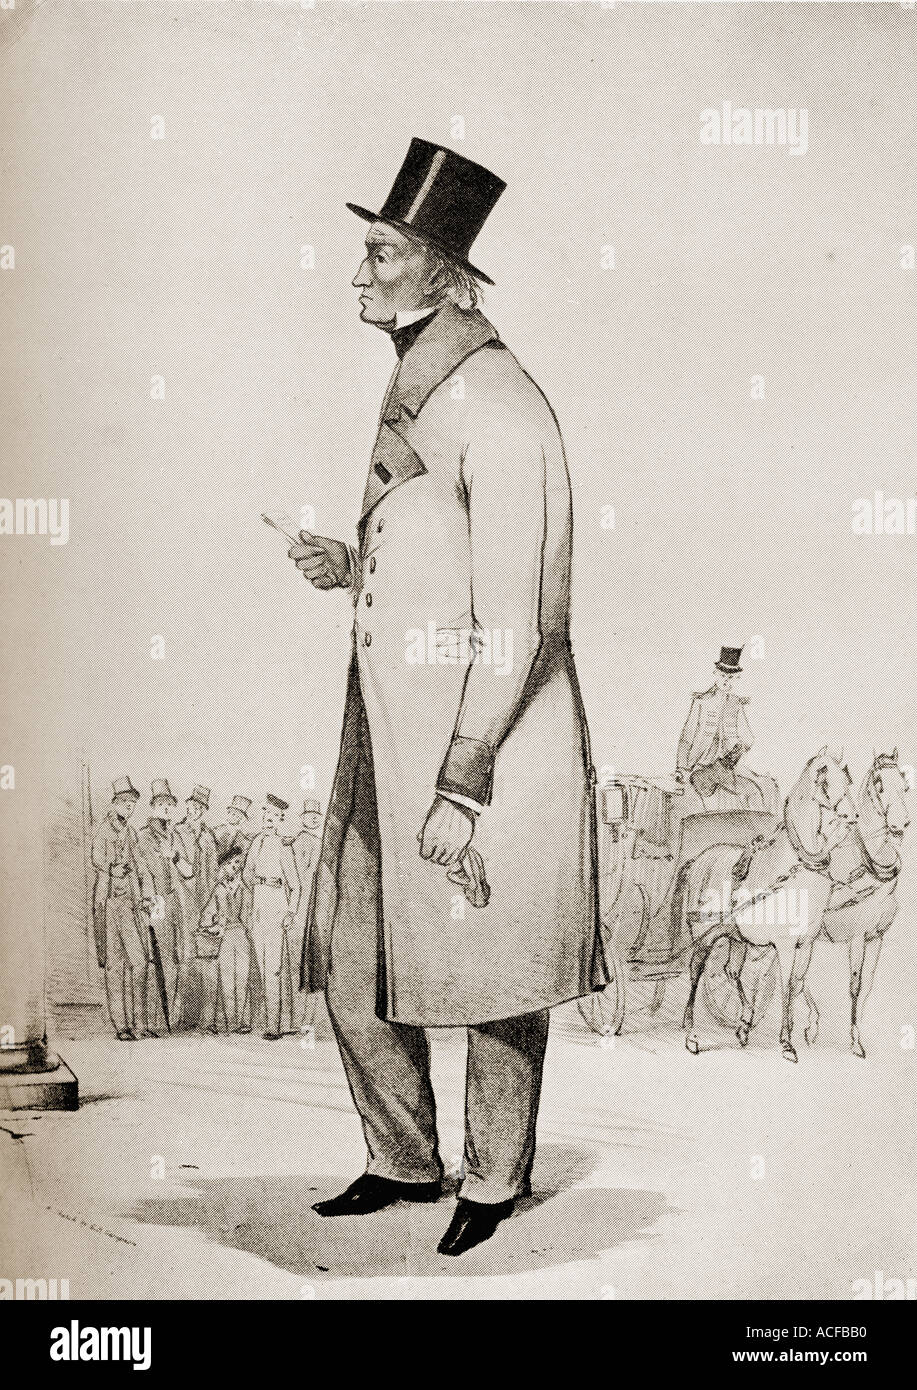 Marshal General Jean-de-Dieu Soult,1st Duke of Dalmatia,1769 - 1851. French general and statesman, Marshal to Napoleón. From a sketch by G B Campion Stock Photo